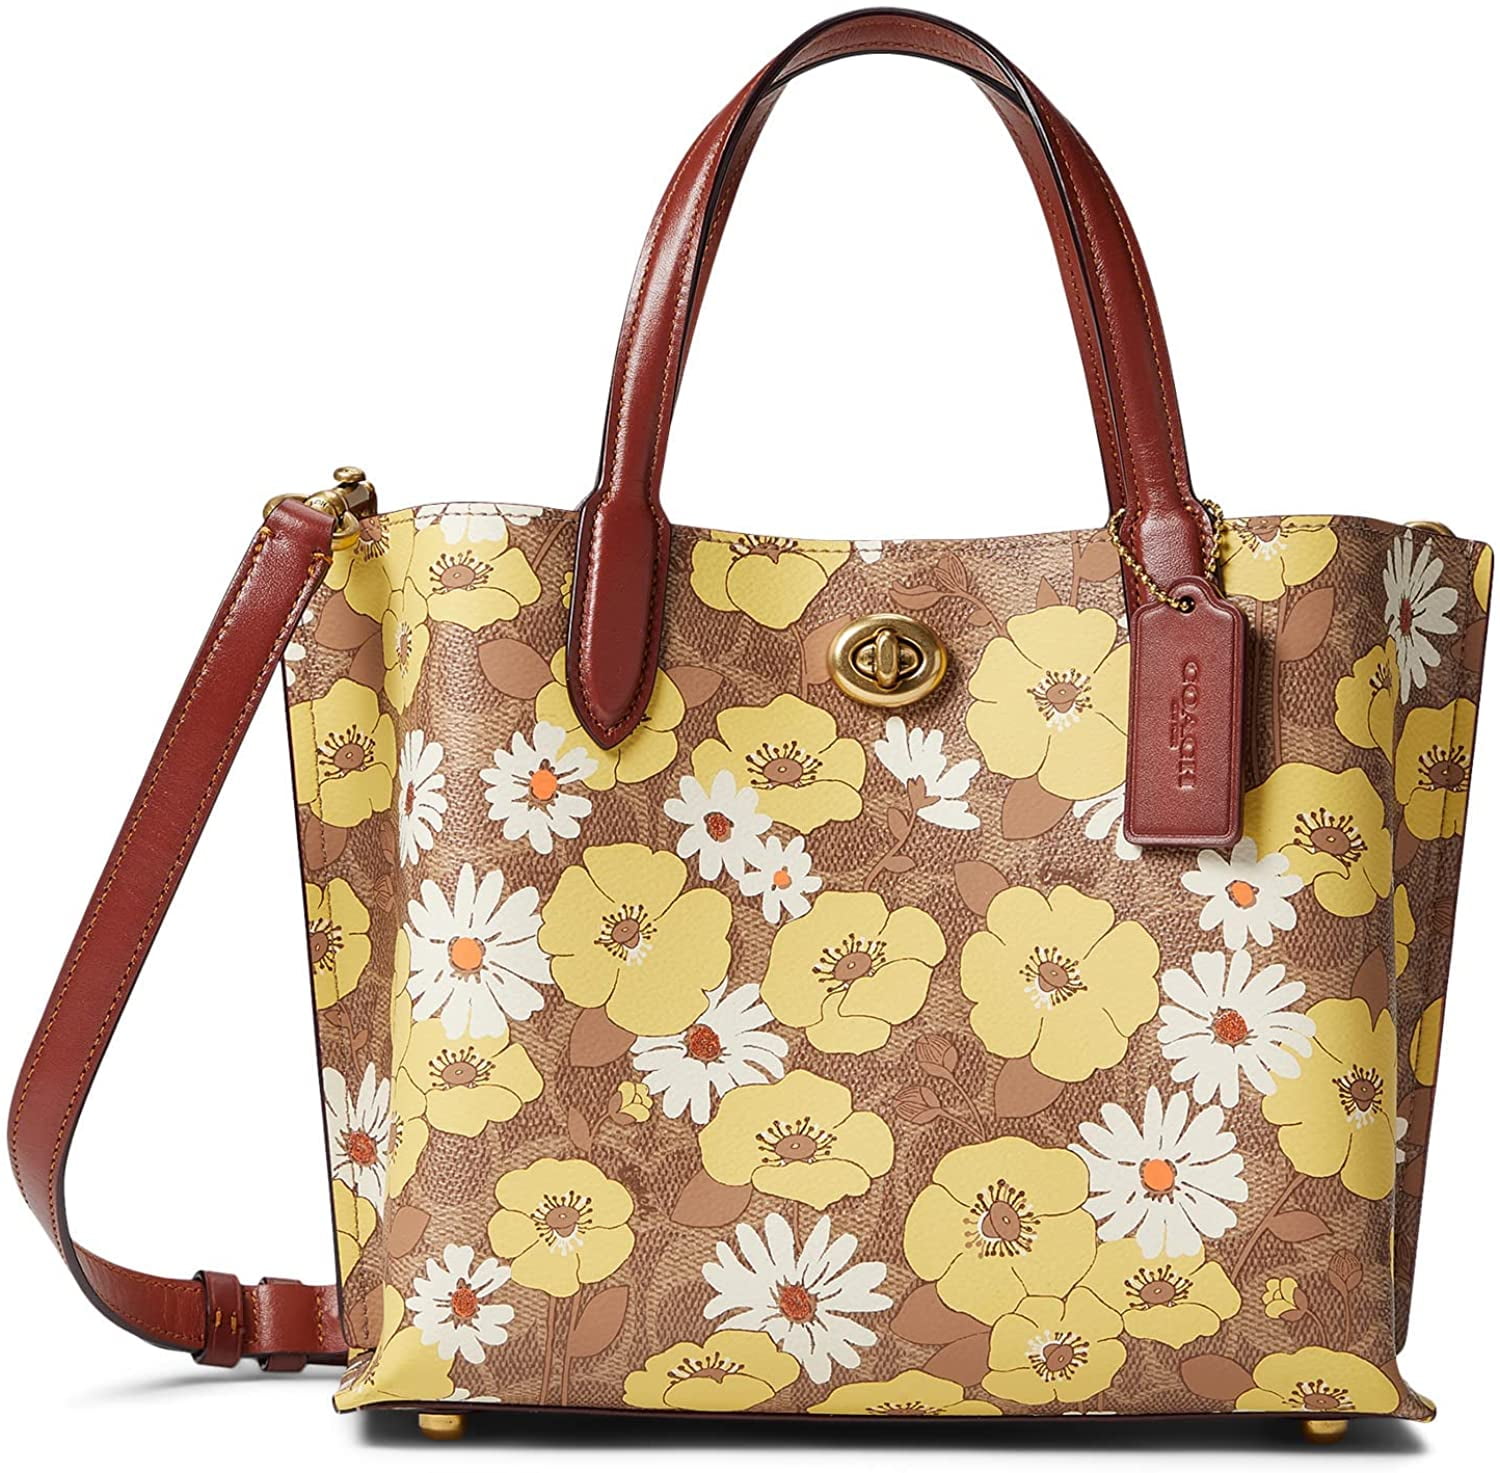 Coach Willow Tote 24 in Signature Canvas Tan/Rust